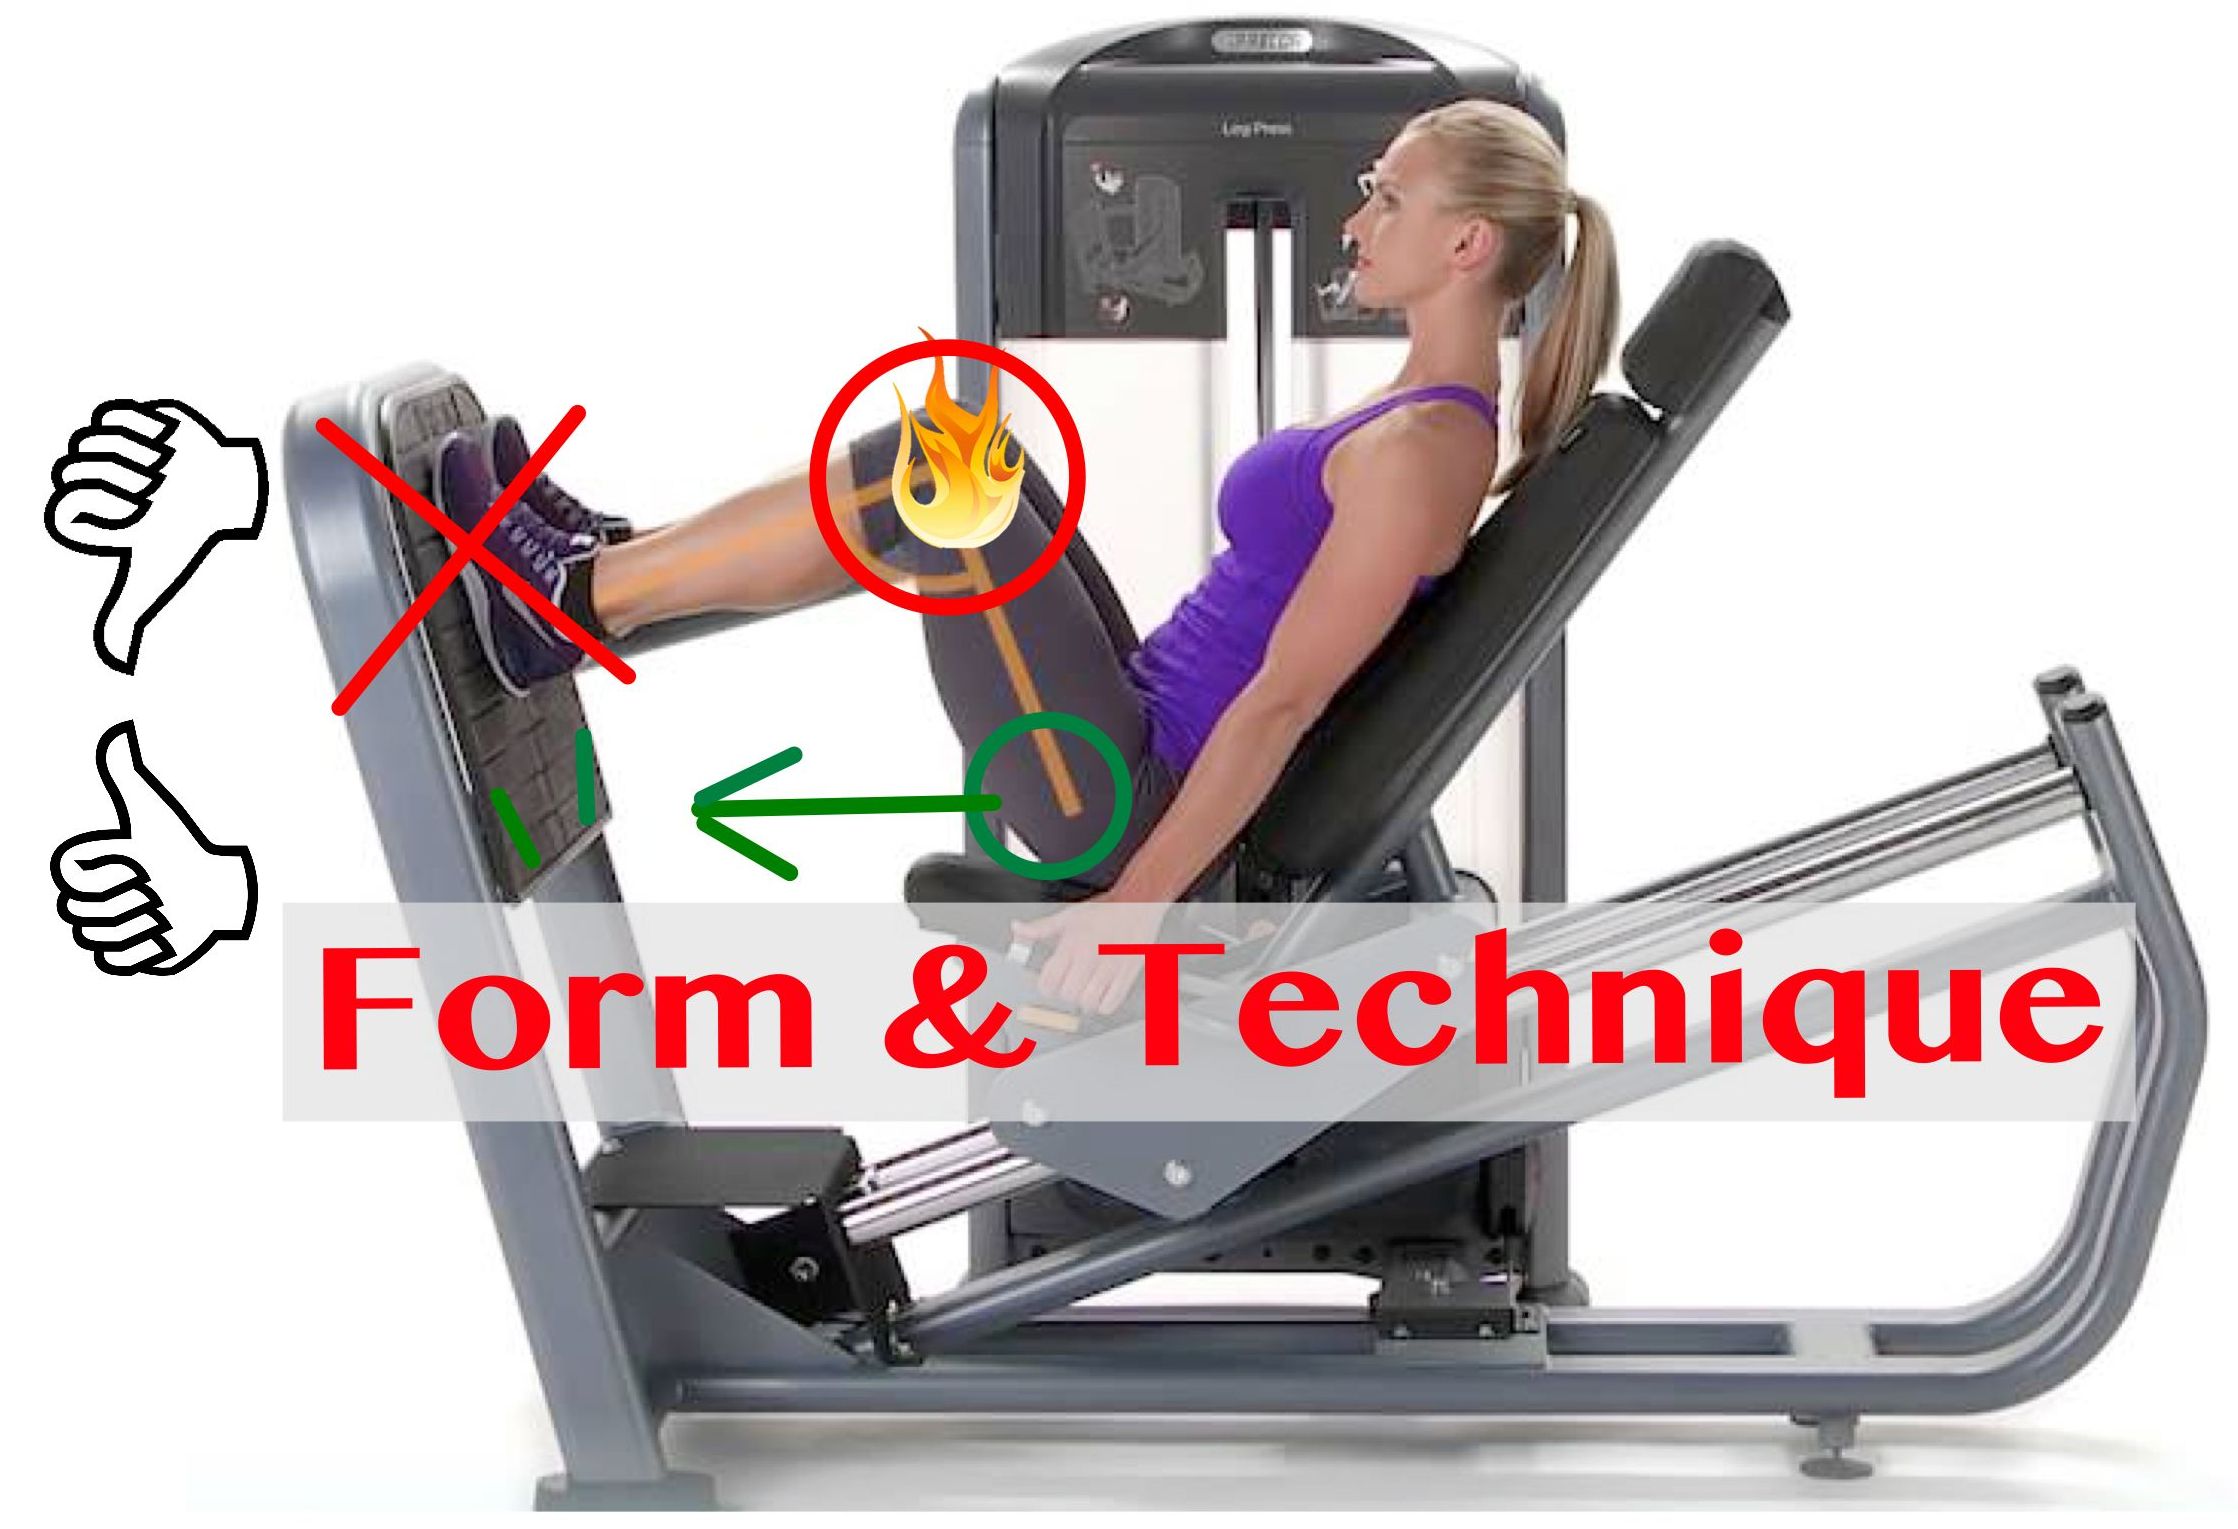 form and techique matters for women's strength training 